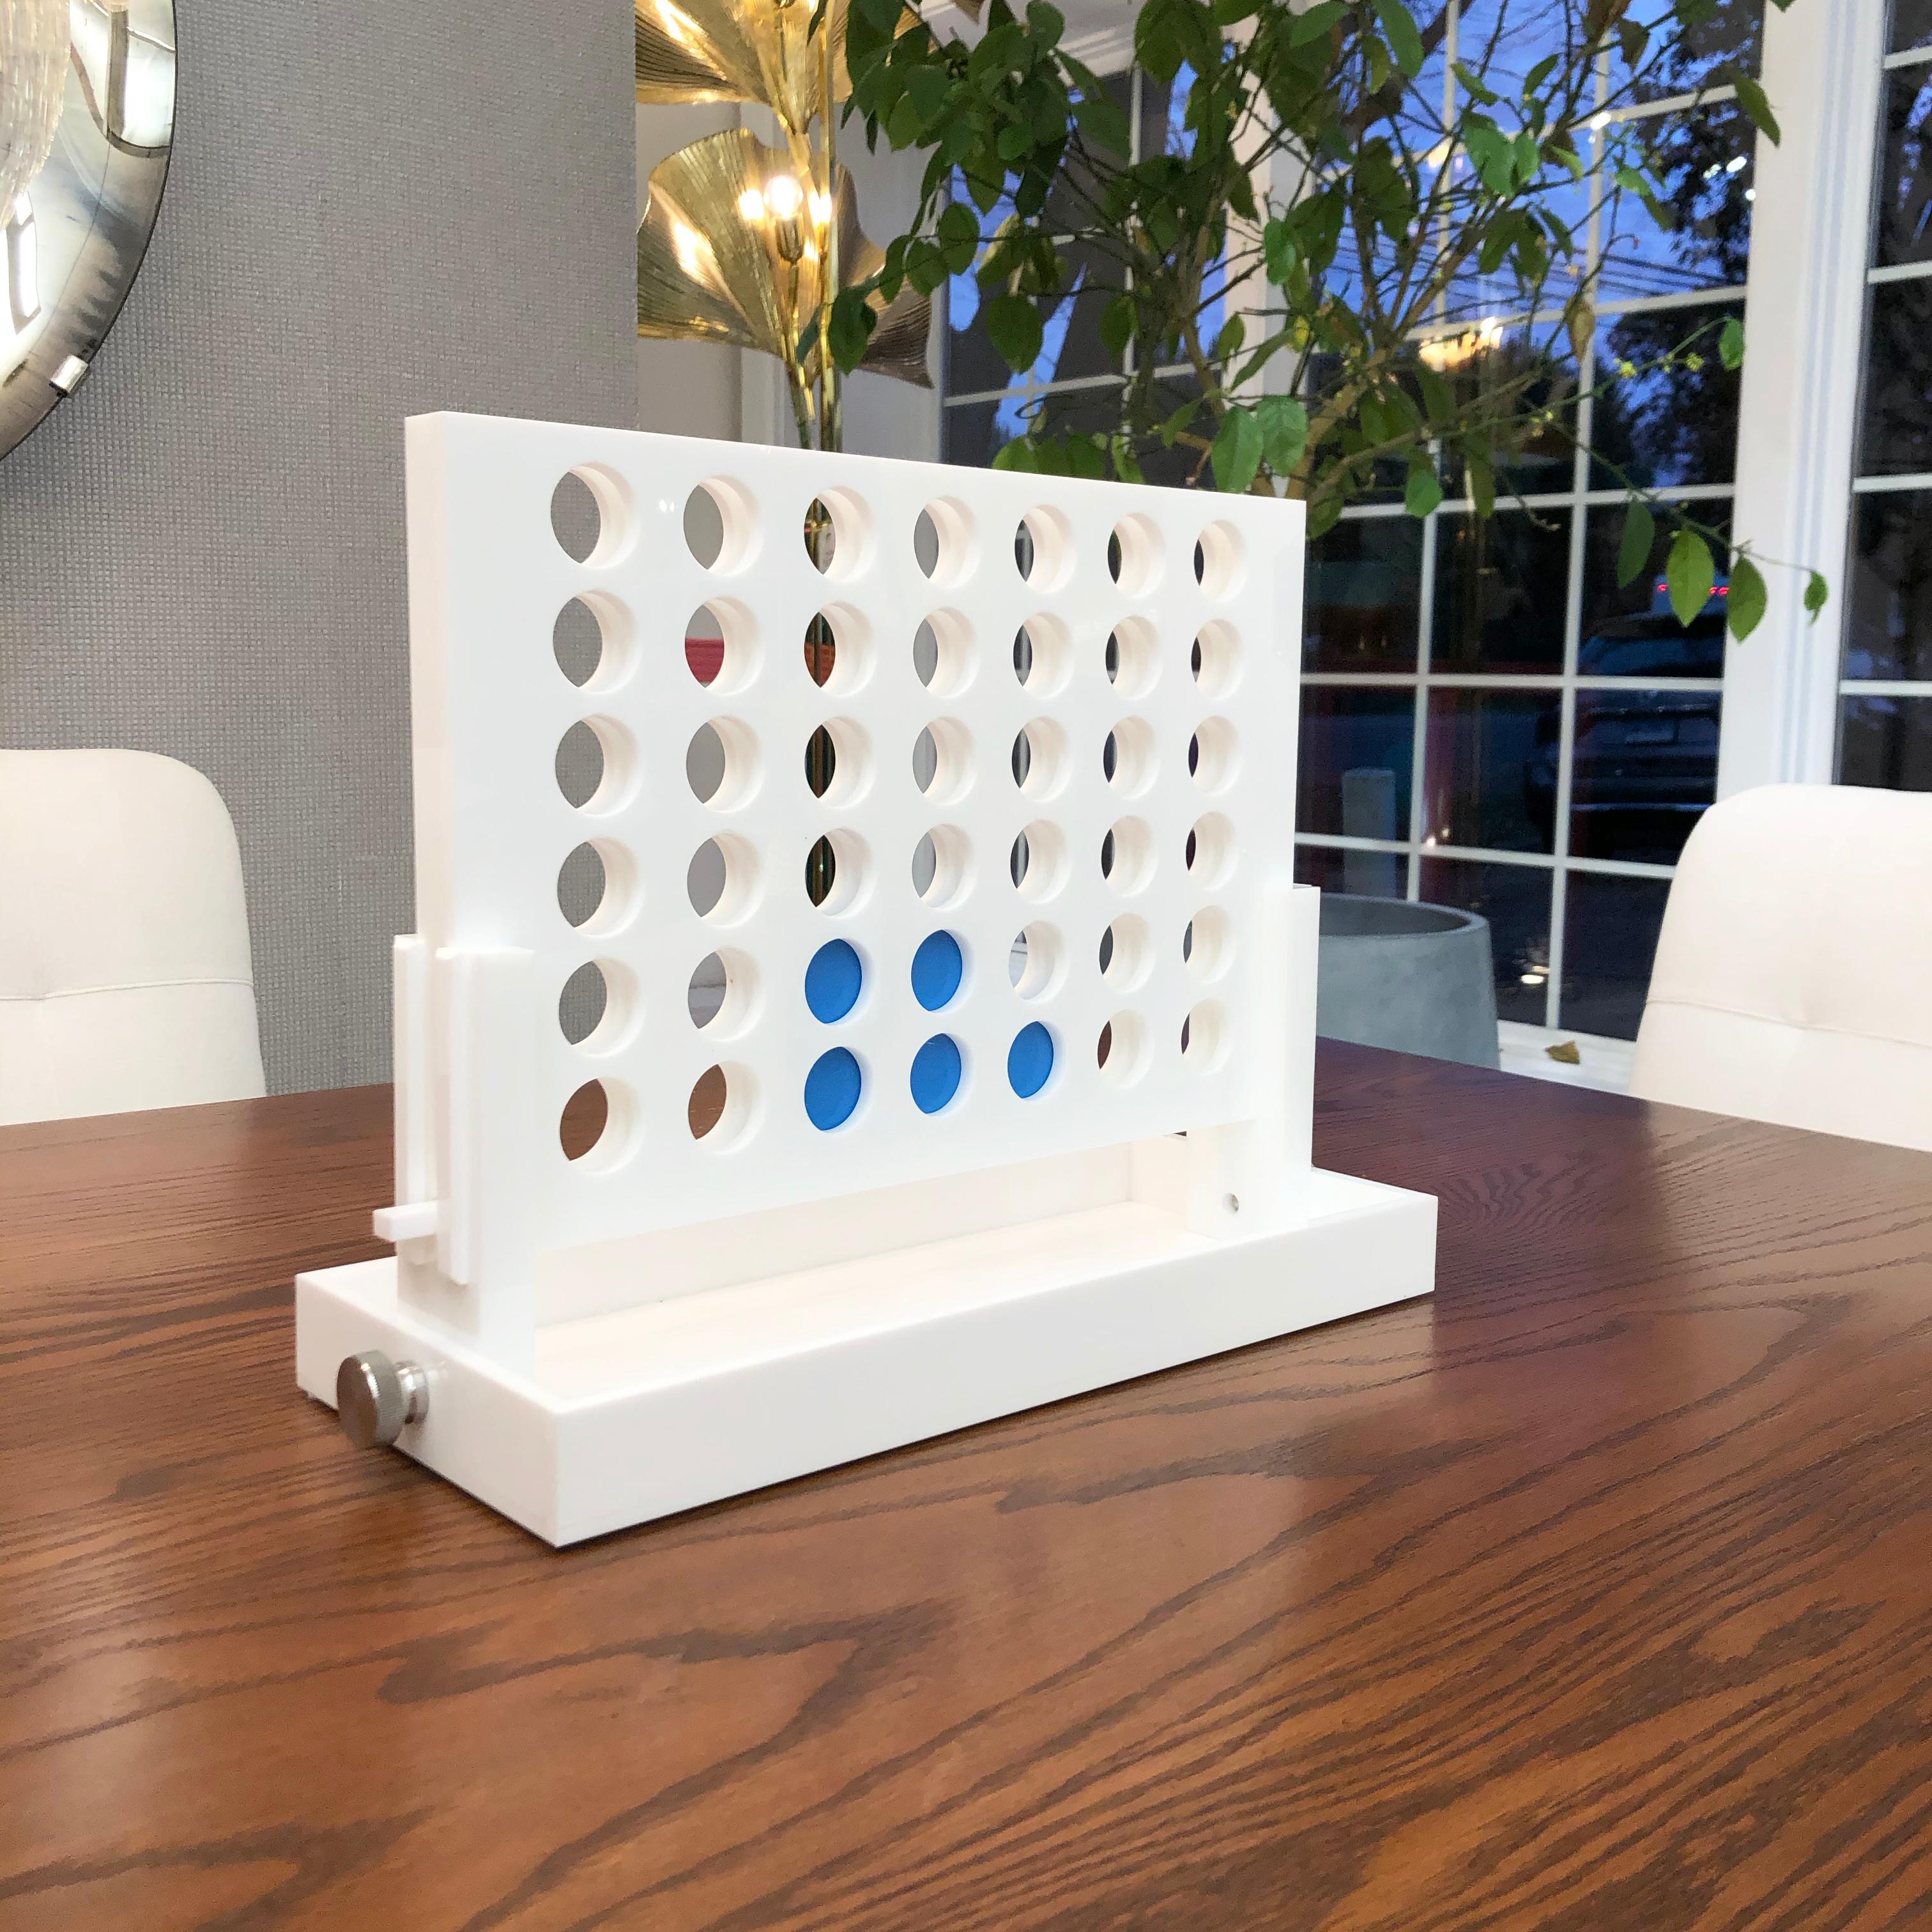 The Classic game of Connect Four is reimagined. Crafted out of acrylic and lacquered white, the game features dark and light blue chips that are pleasing to the eye; allowing this piece to be kept out year round as decor. 

Measurements

13” H x